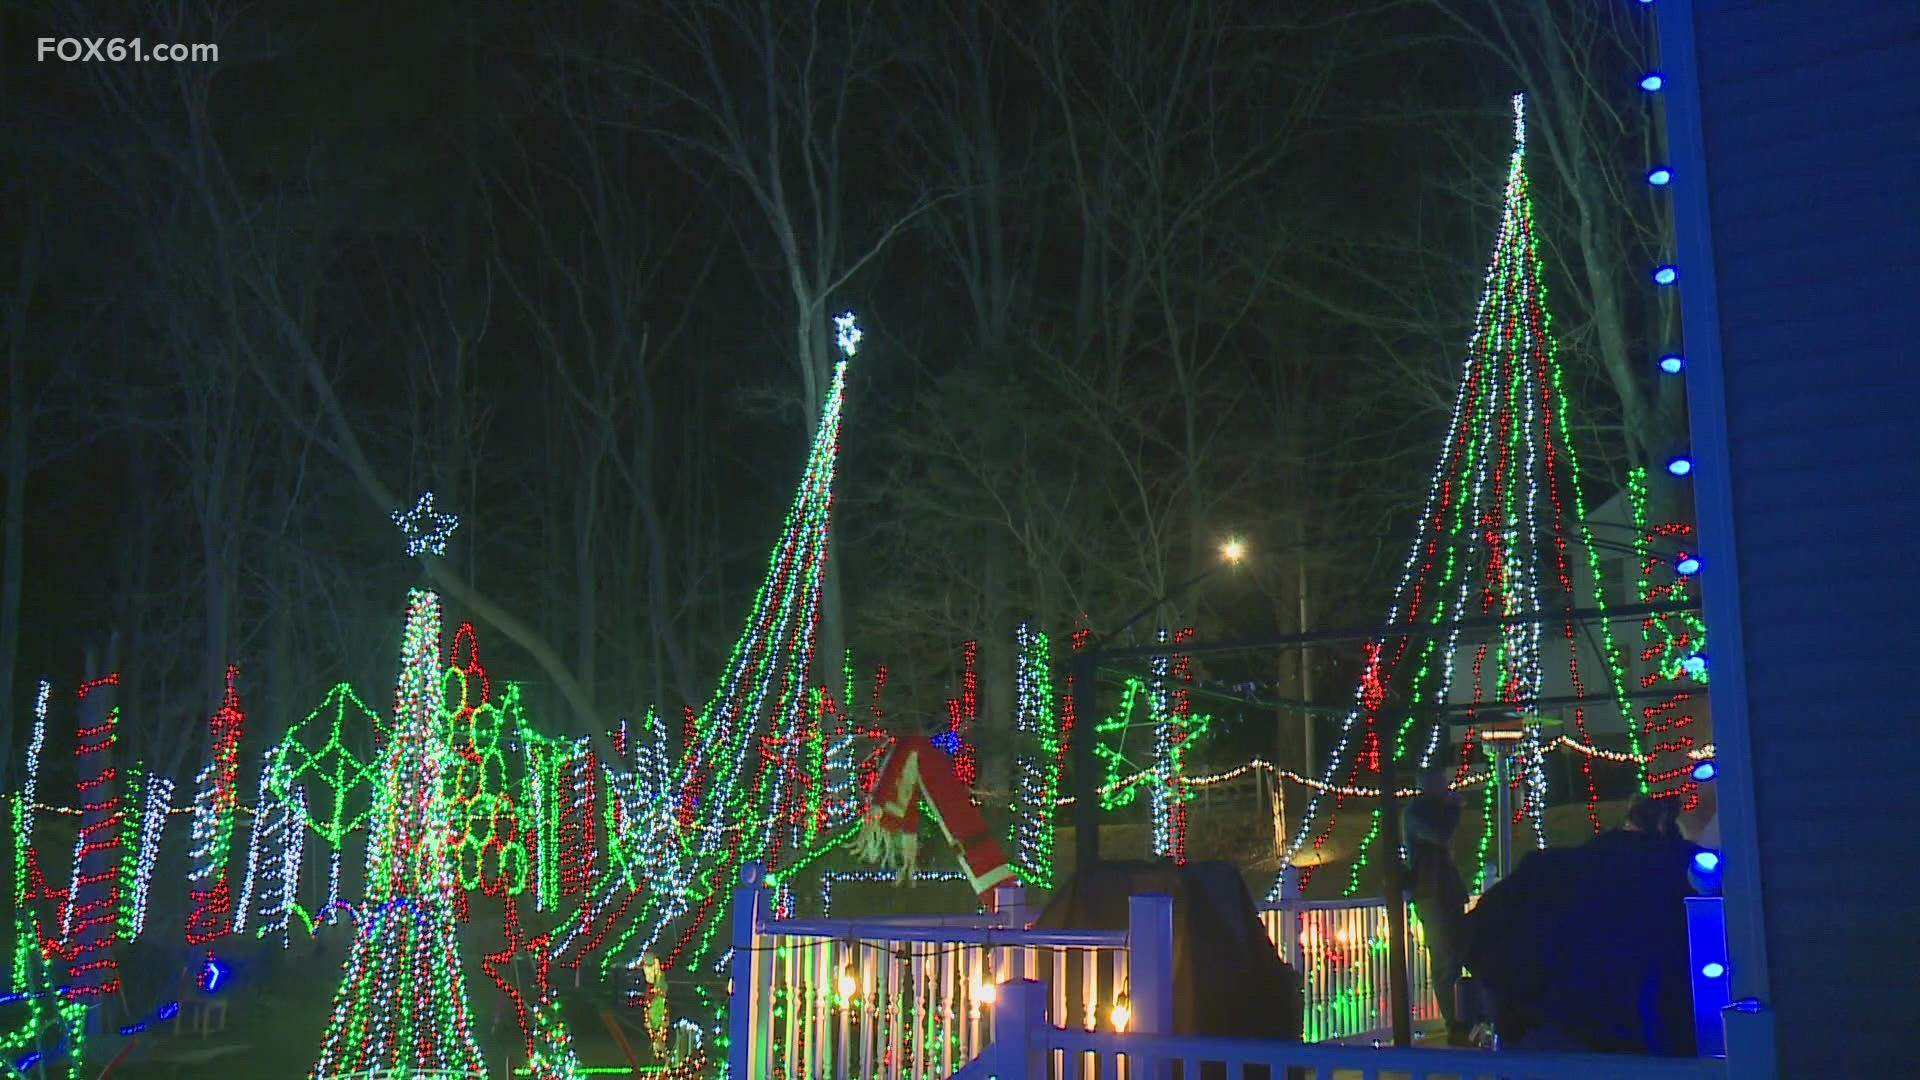 Glastonbury's "Whoville" is lit up once again this holiday season.